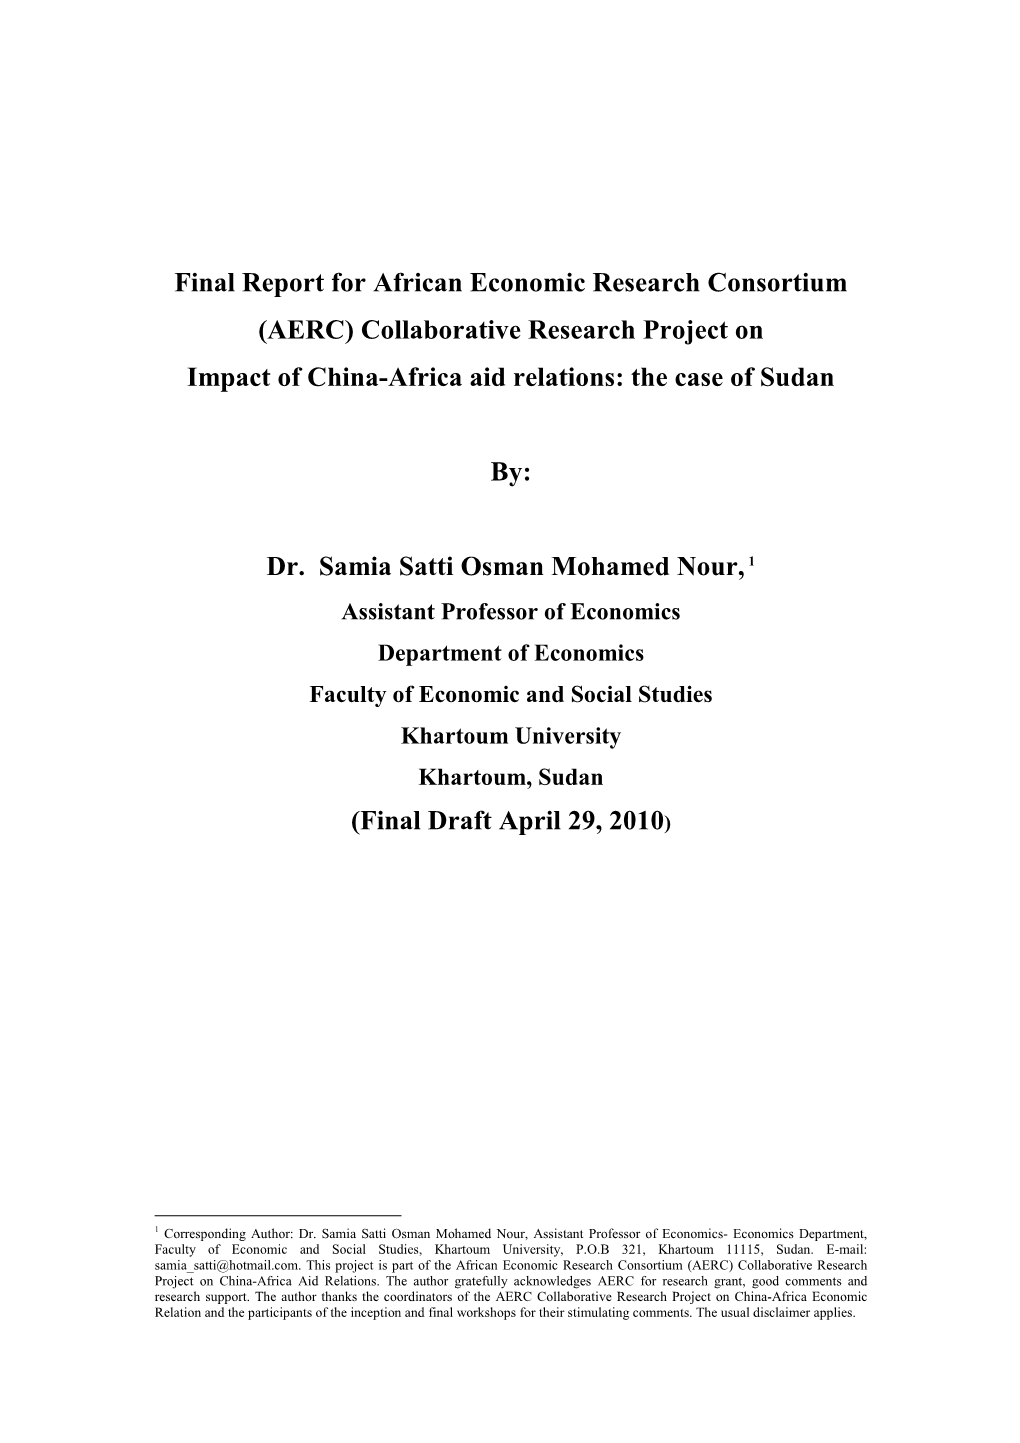 Collaborative Research Project on Impact of China-Africa Aid Relations: the Case of Sudan